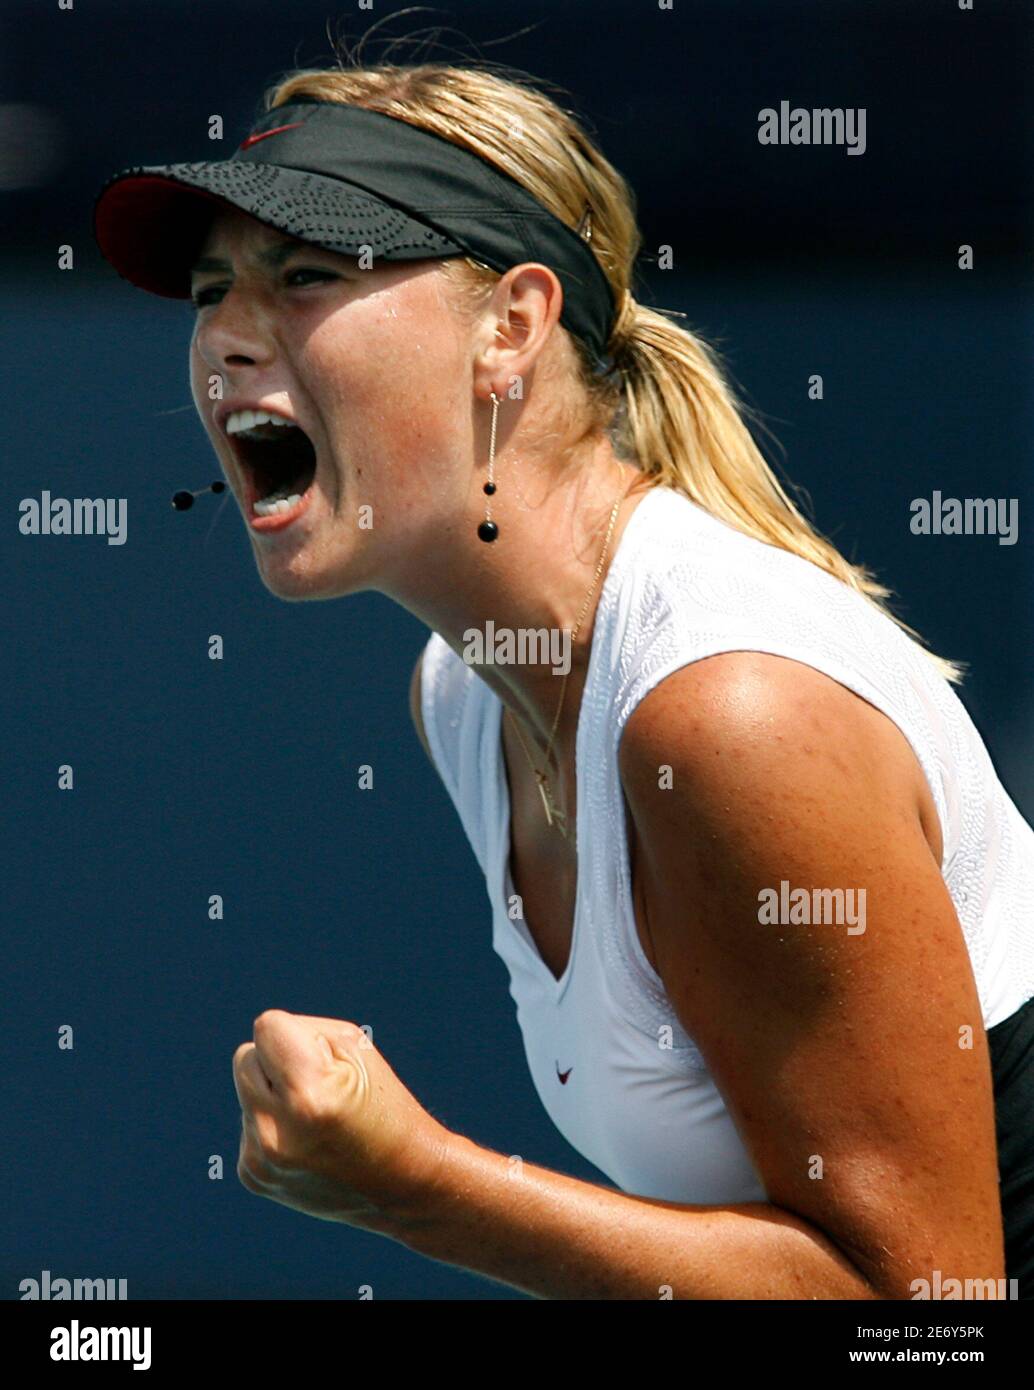 Russian Maria Sharapova yells out after holding her server against Switzerland's Patty Schnyder during the singles final at the Acura Classic tennis tournament in Carlsbad, California August 5, 2007. Sharapova won.      REUTERS/Mike Blake             (UNITED STATES) Stock Photo